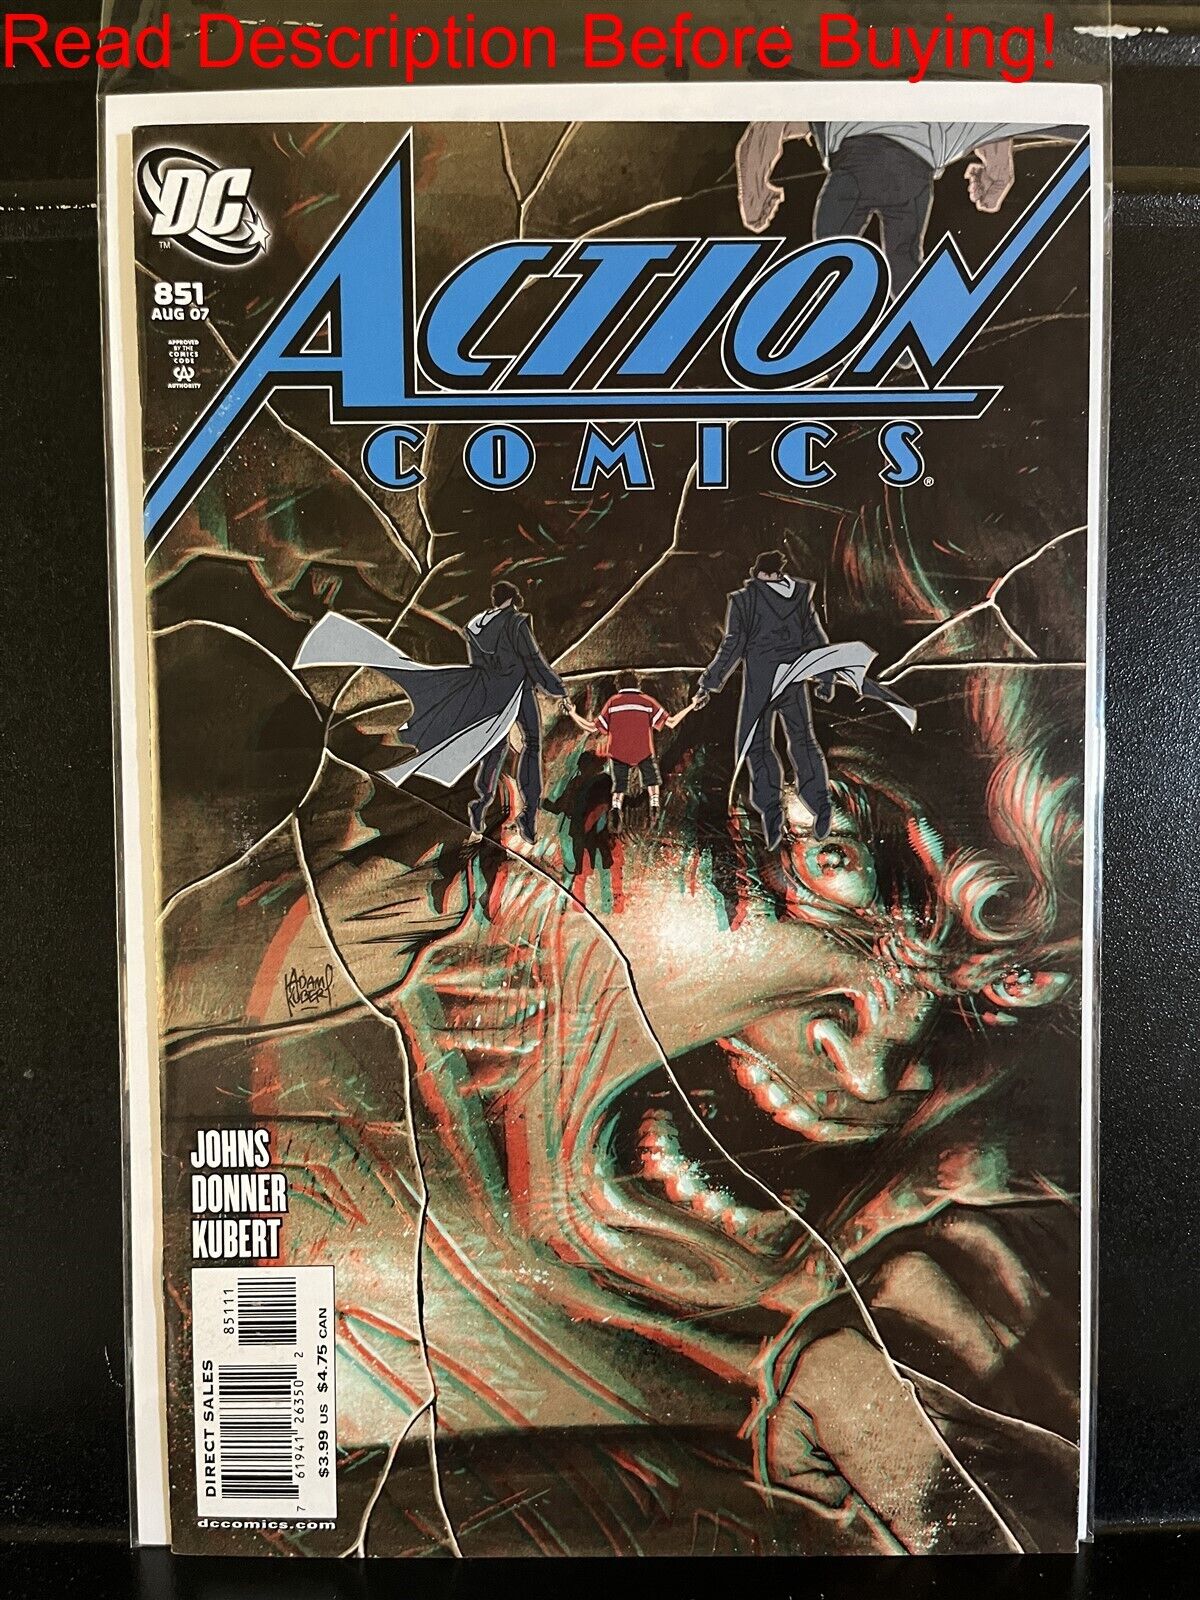 BARGAIN BOOKS ($5 MIN PURCHASE) Action Comics #851 (2007 DC) We Combine Shipping